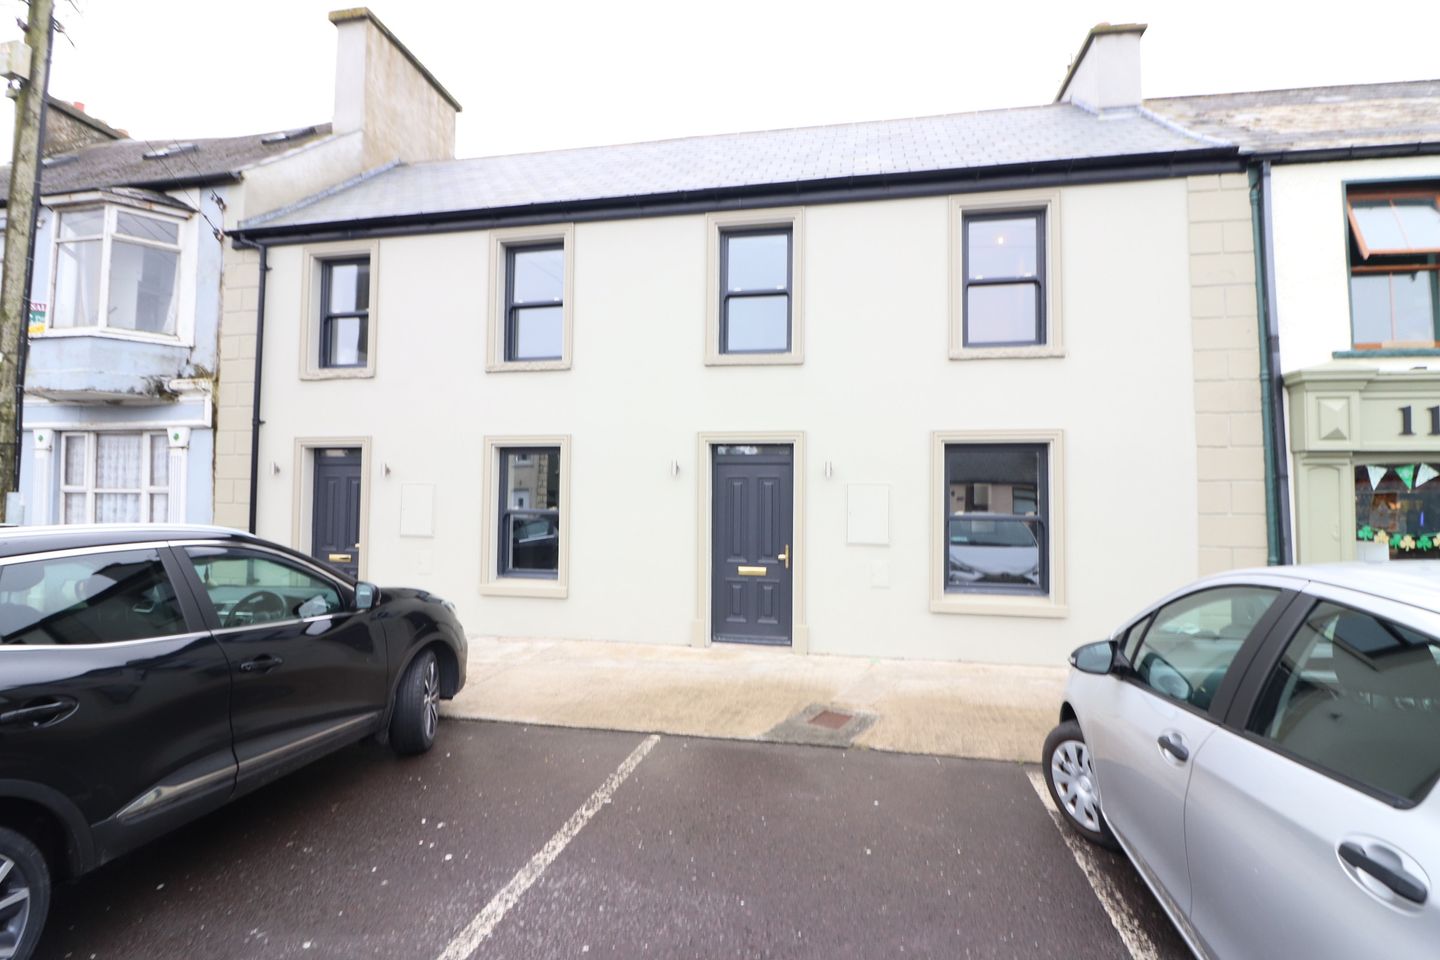 10 O'Connell Street, Kilkee, Co. Clare, V15KP99